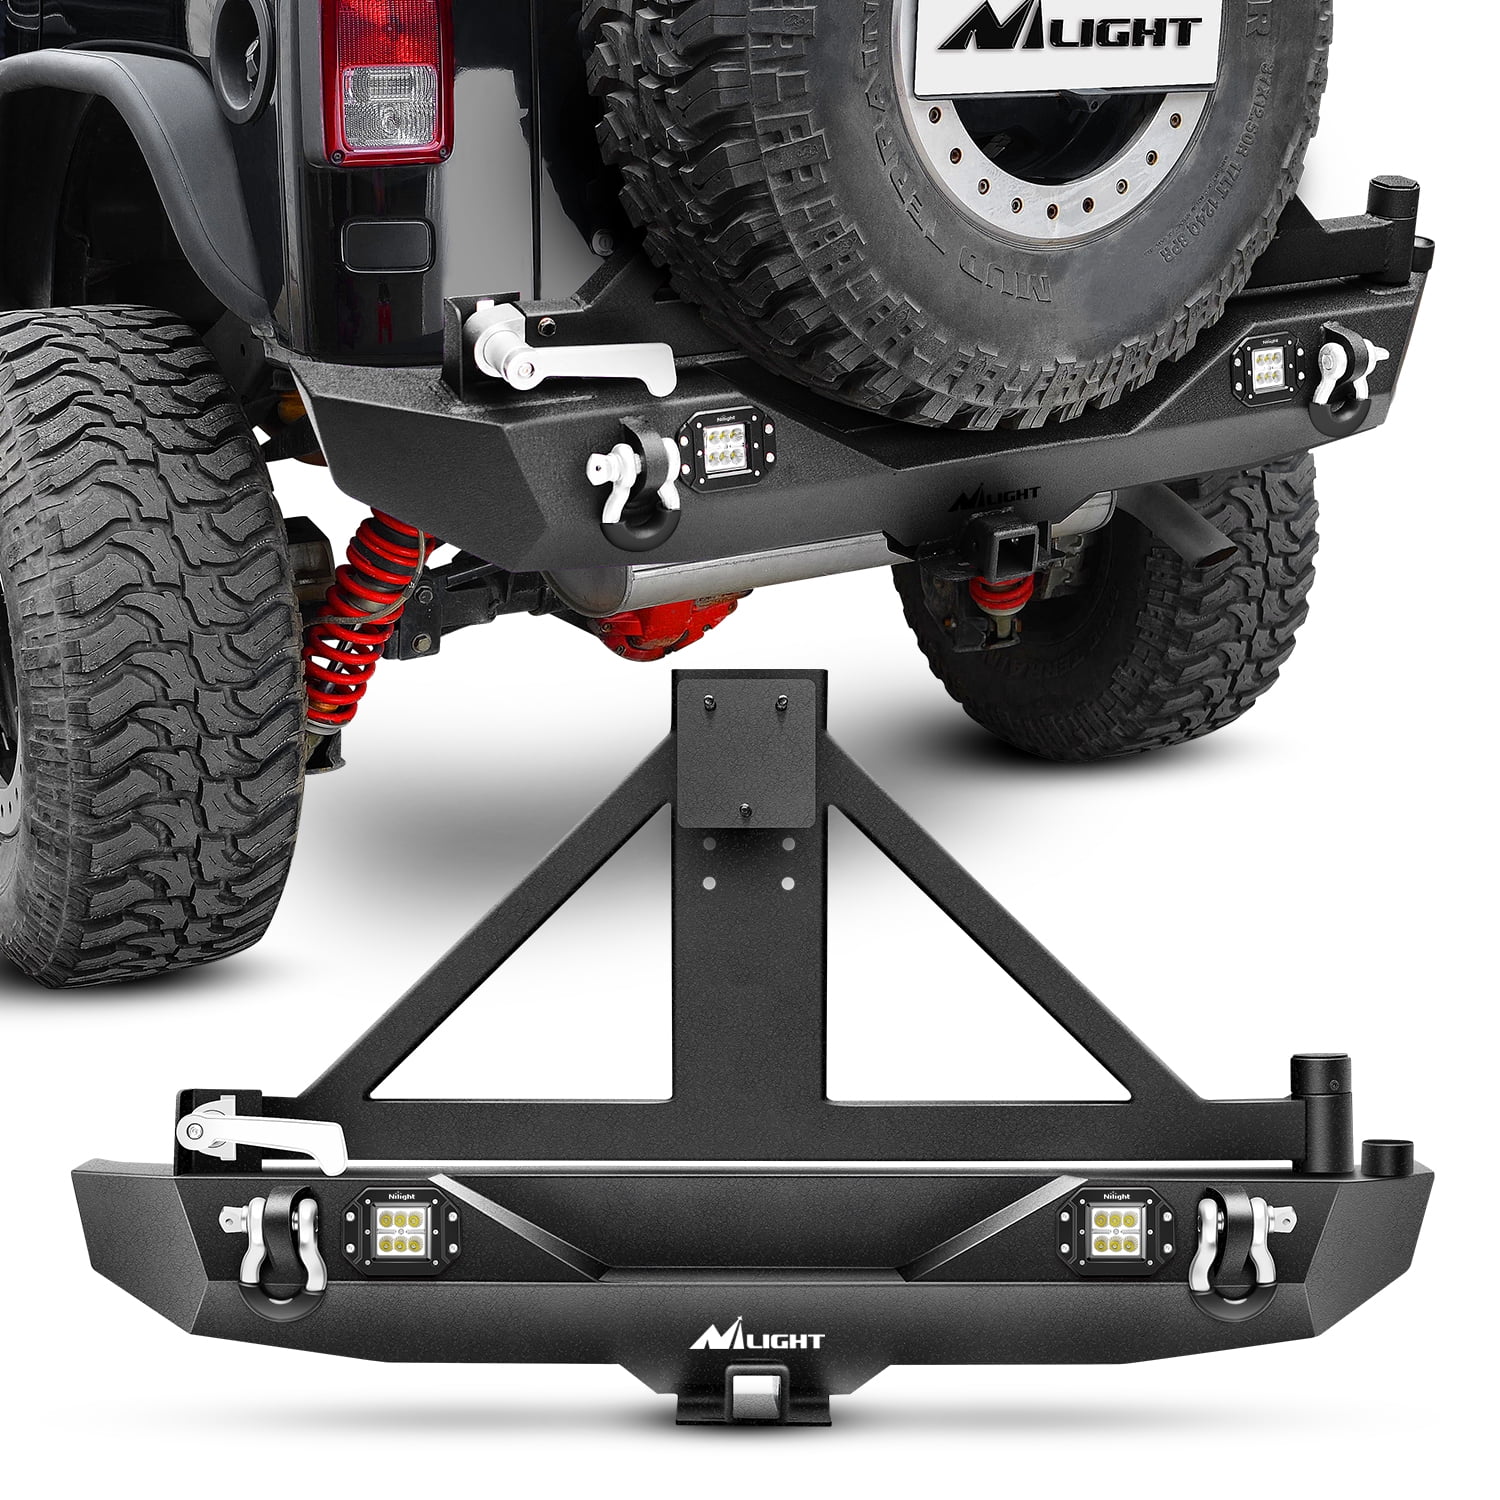 Nilight JK-53A Rear Bumper & Spare Tire Rack & Hitch Receiver w/2 LED  Lights Compatible for 2007-2018 Jeep Wrangler JK & Unlimited 